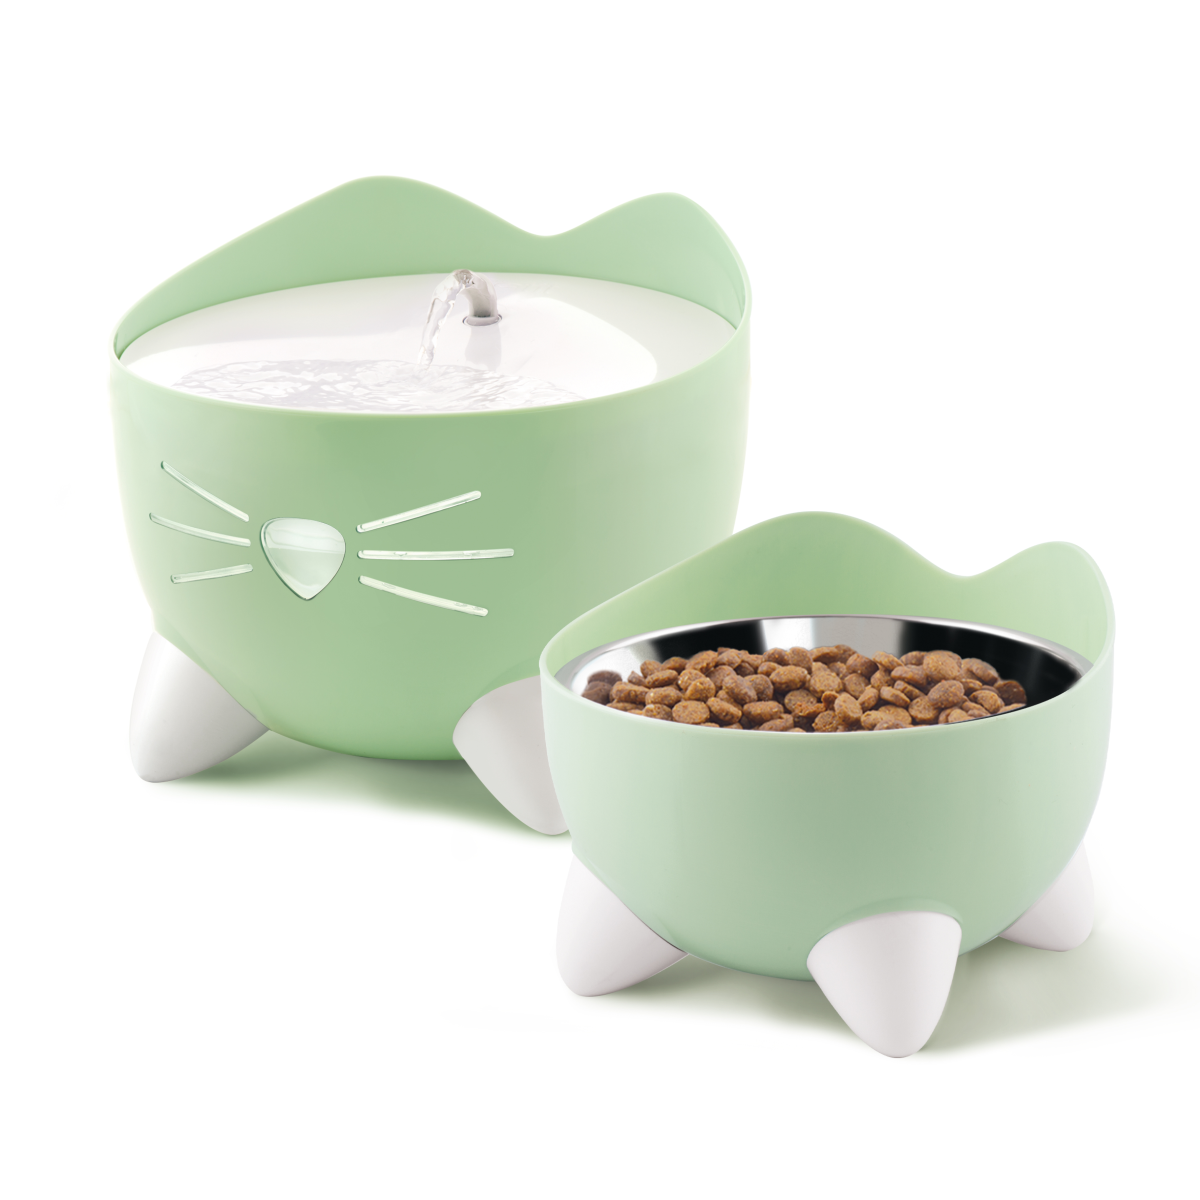 CatIt Pixi Drinking Fountain - Combo Pack/Green